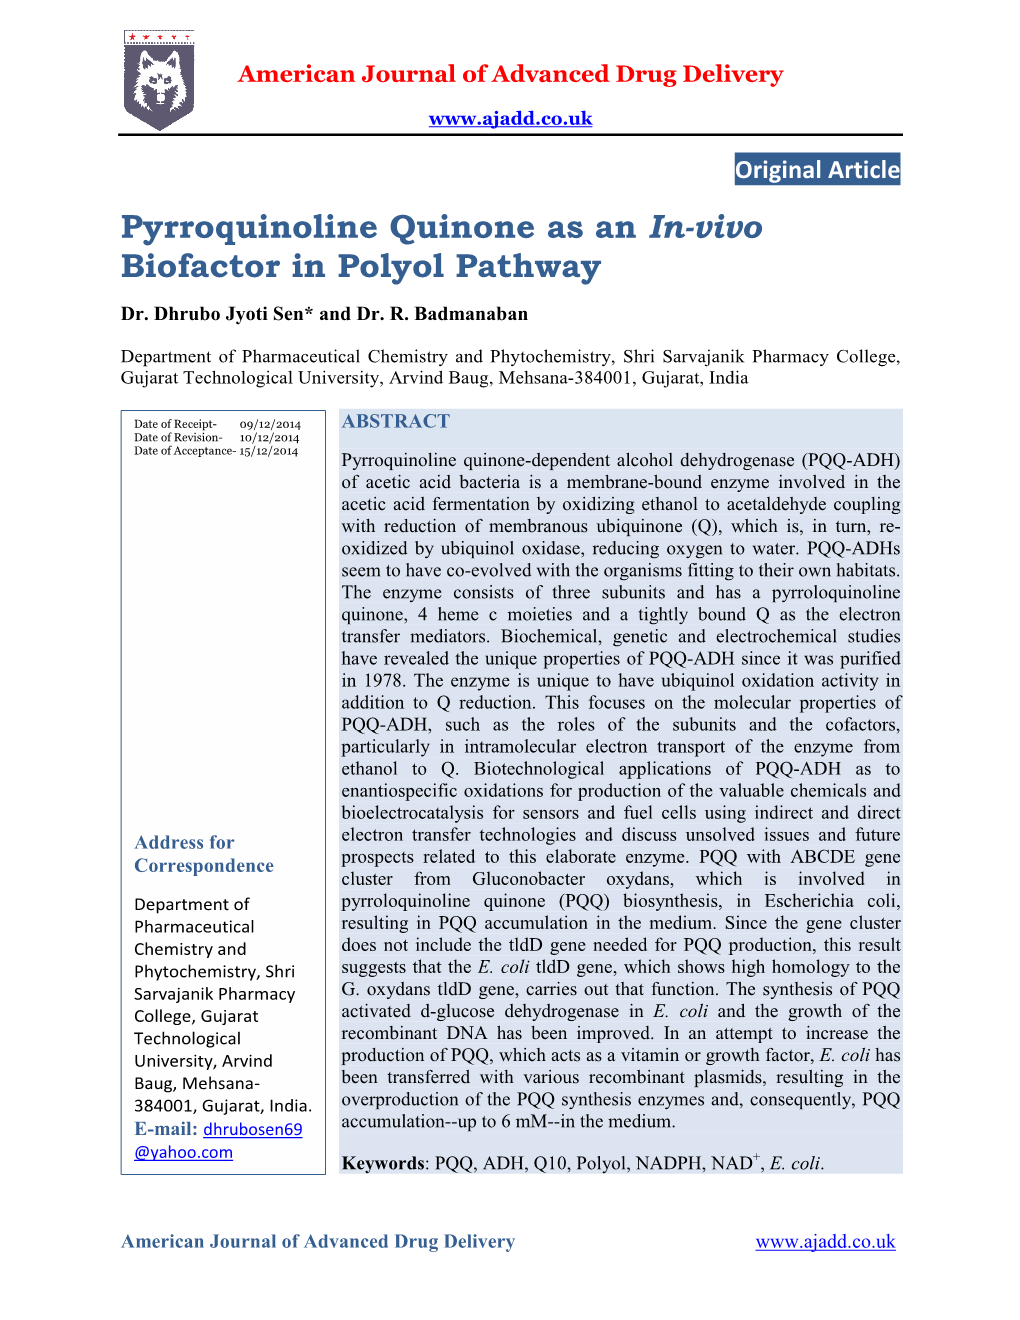 Pyrroquinoline Quinone As an In-Vivo Biofactor in Polyol Pathway Dr